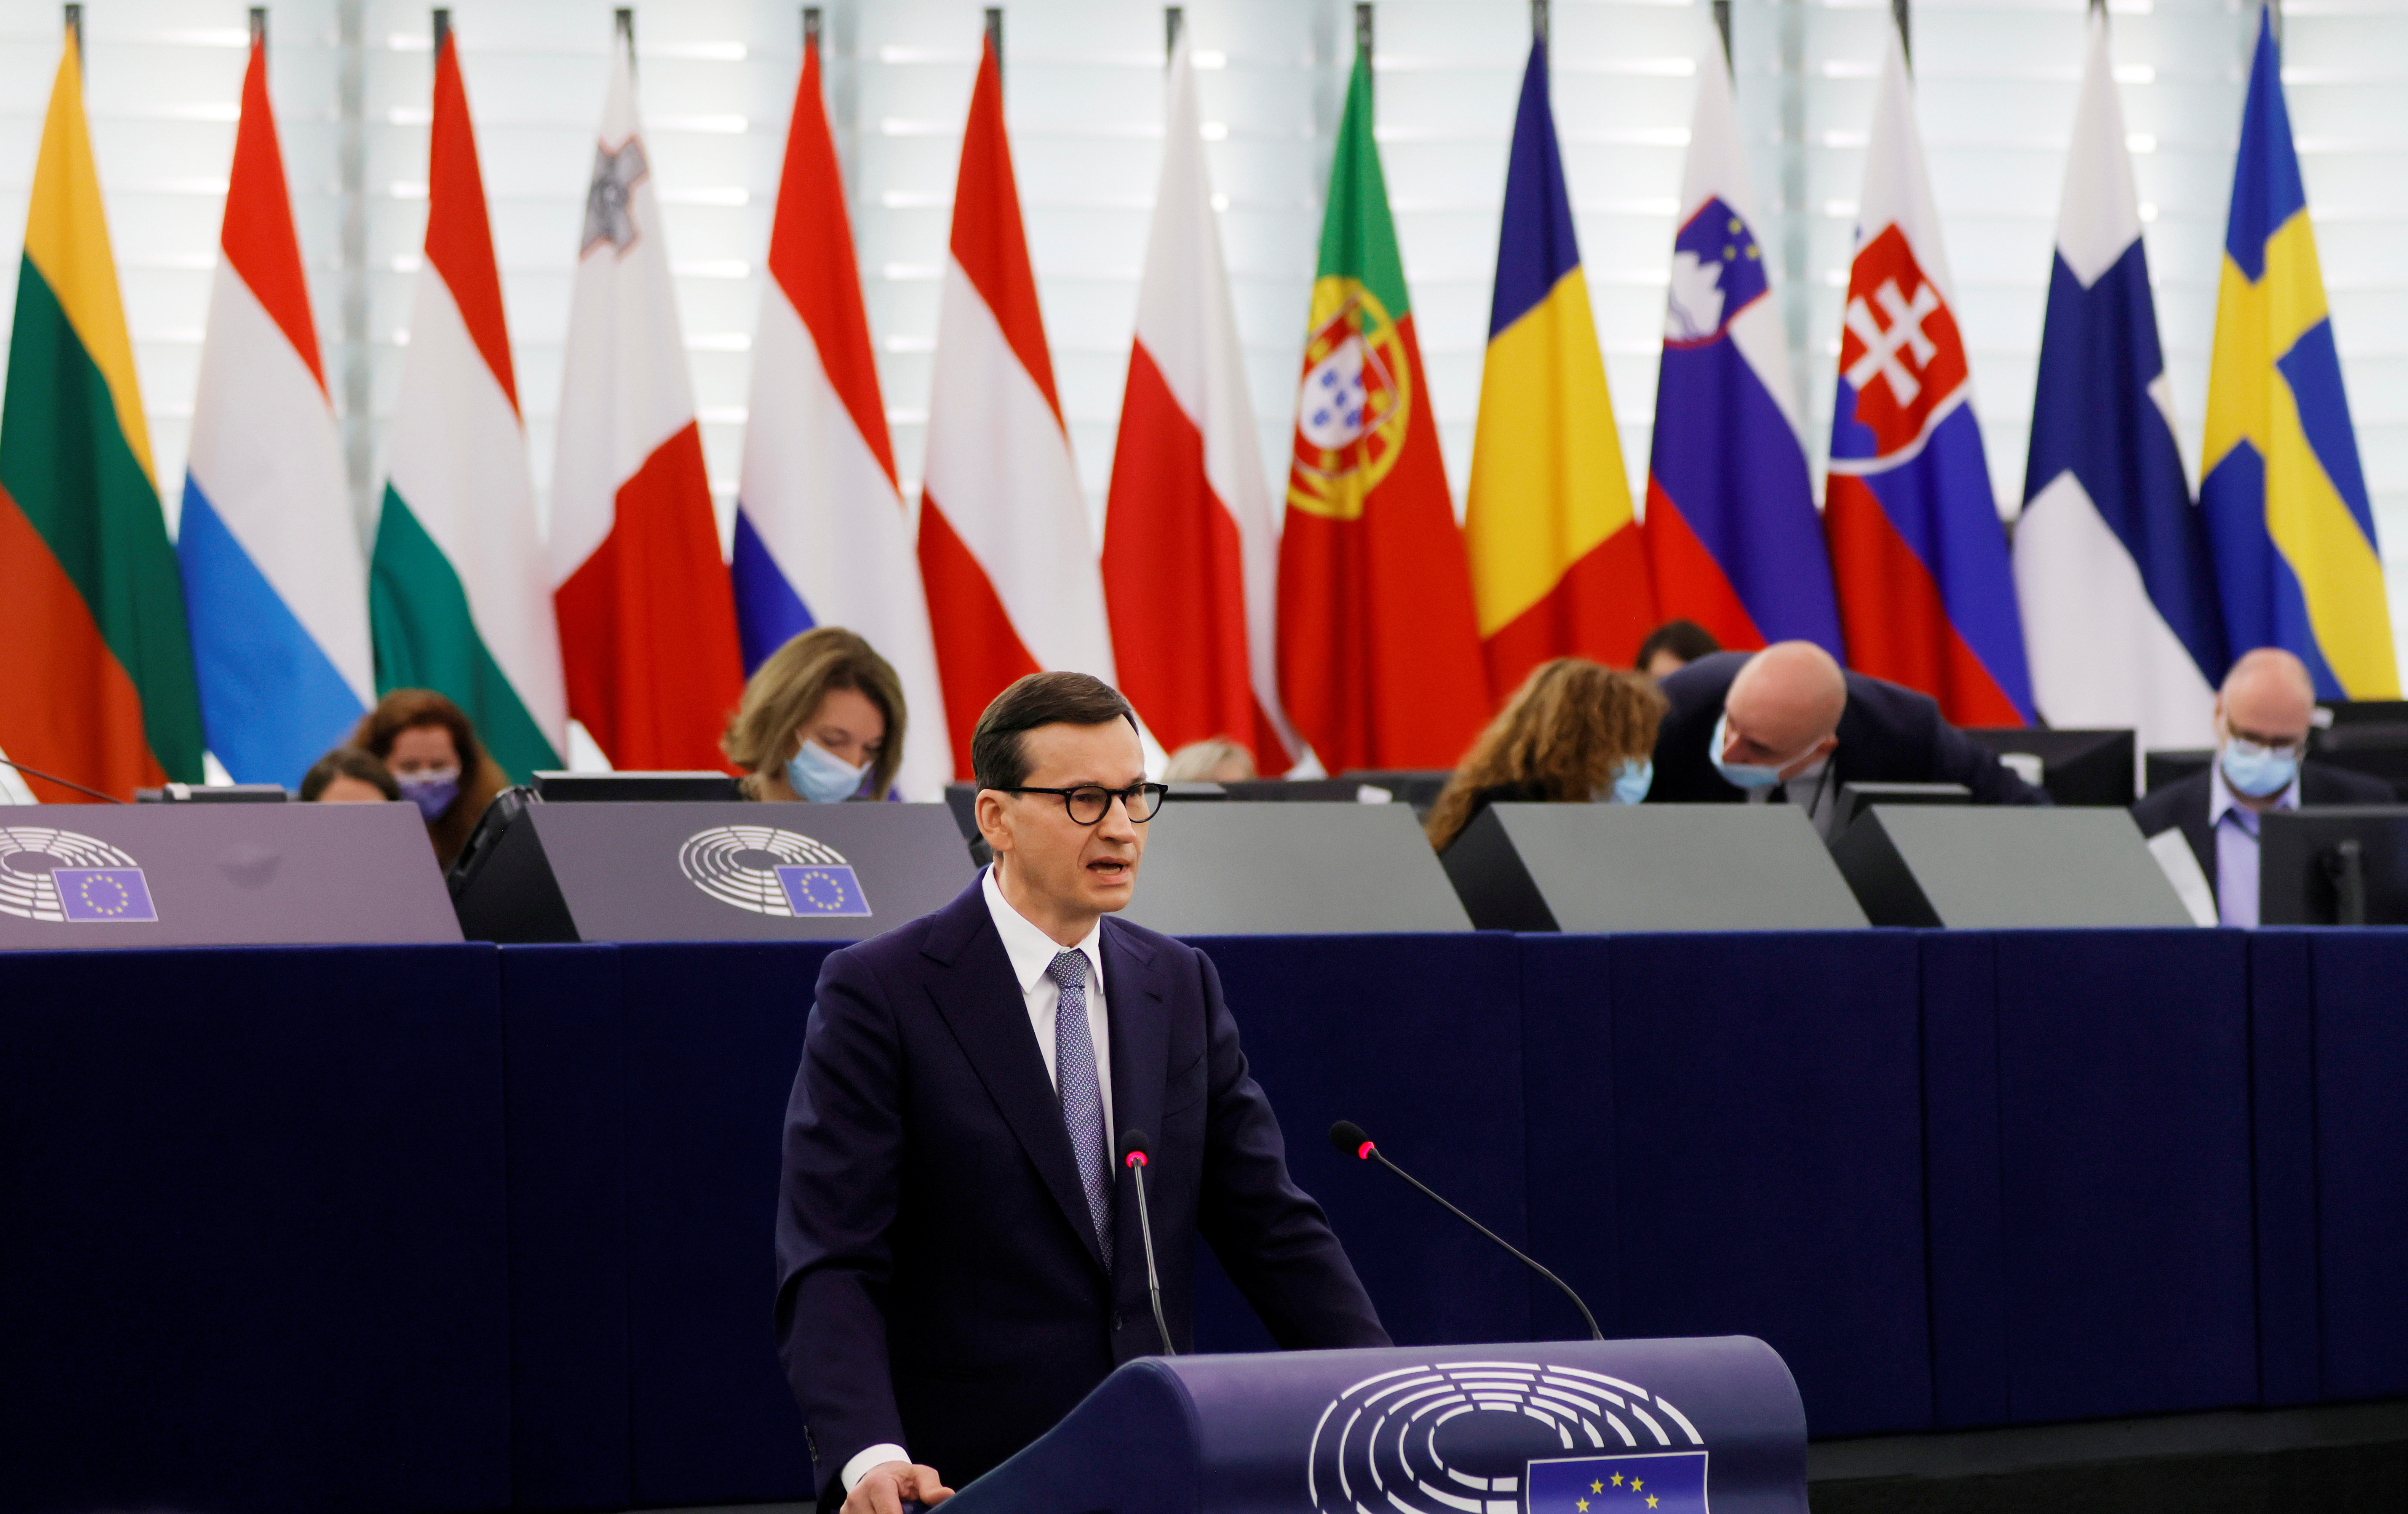 Polish Prime Minister Mateusz Morawiecki delivers a speech during a debate on Poland's challenge to the supremacy of EU laws at the European Parliament in Strasbourg, France October 19, 2021. Ronald Wittek/Pool via REUTERS